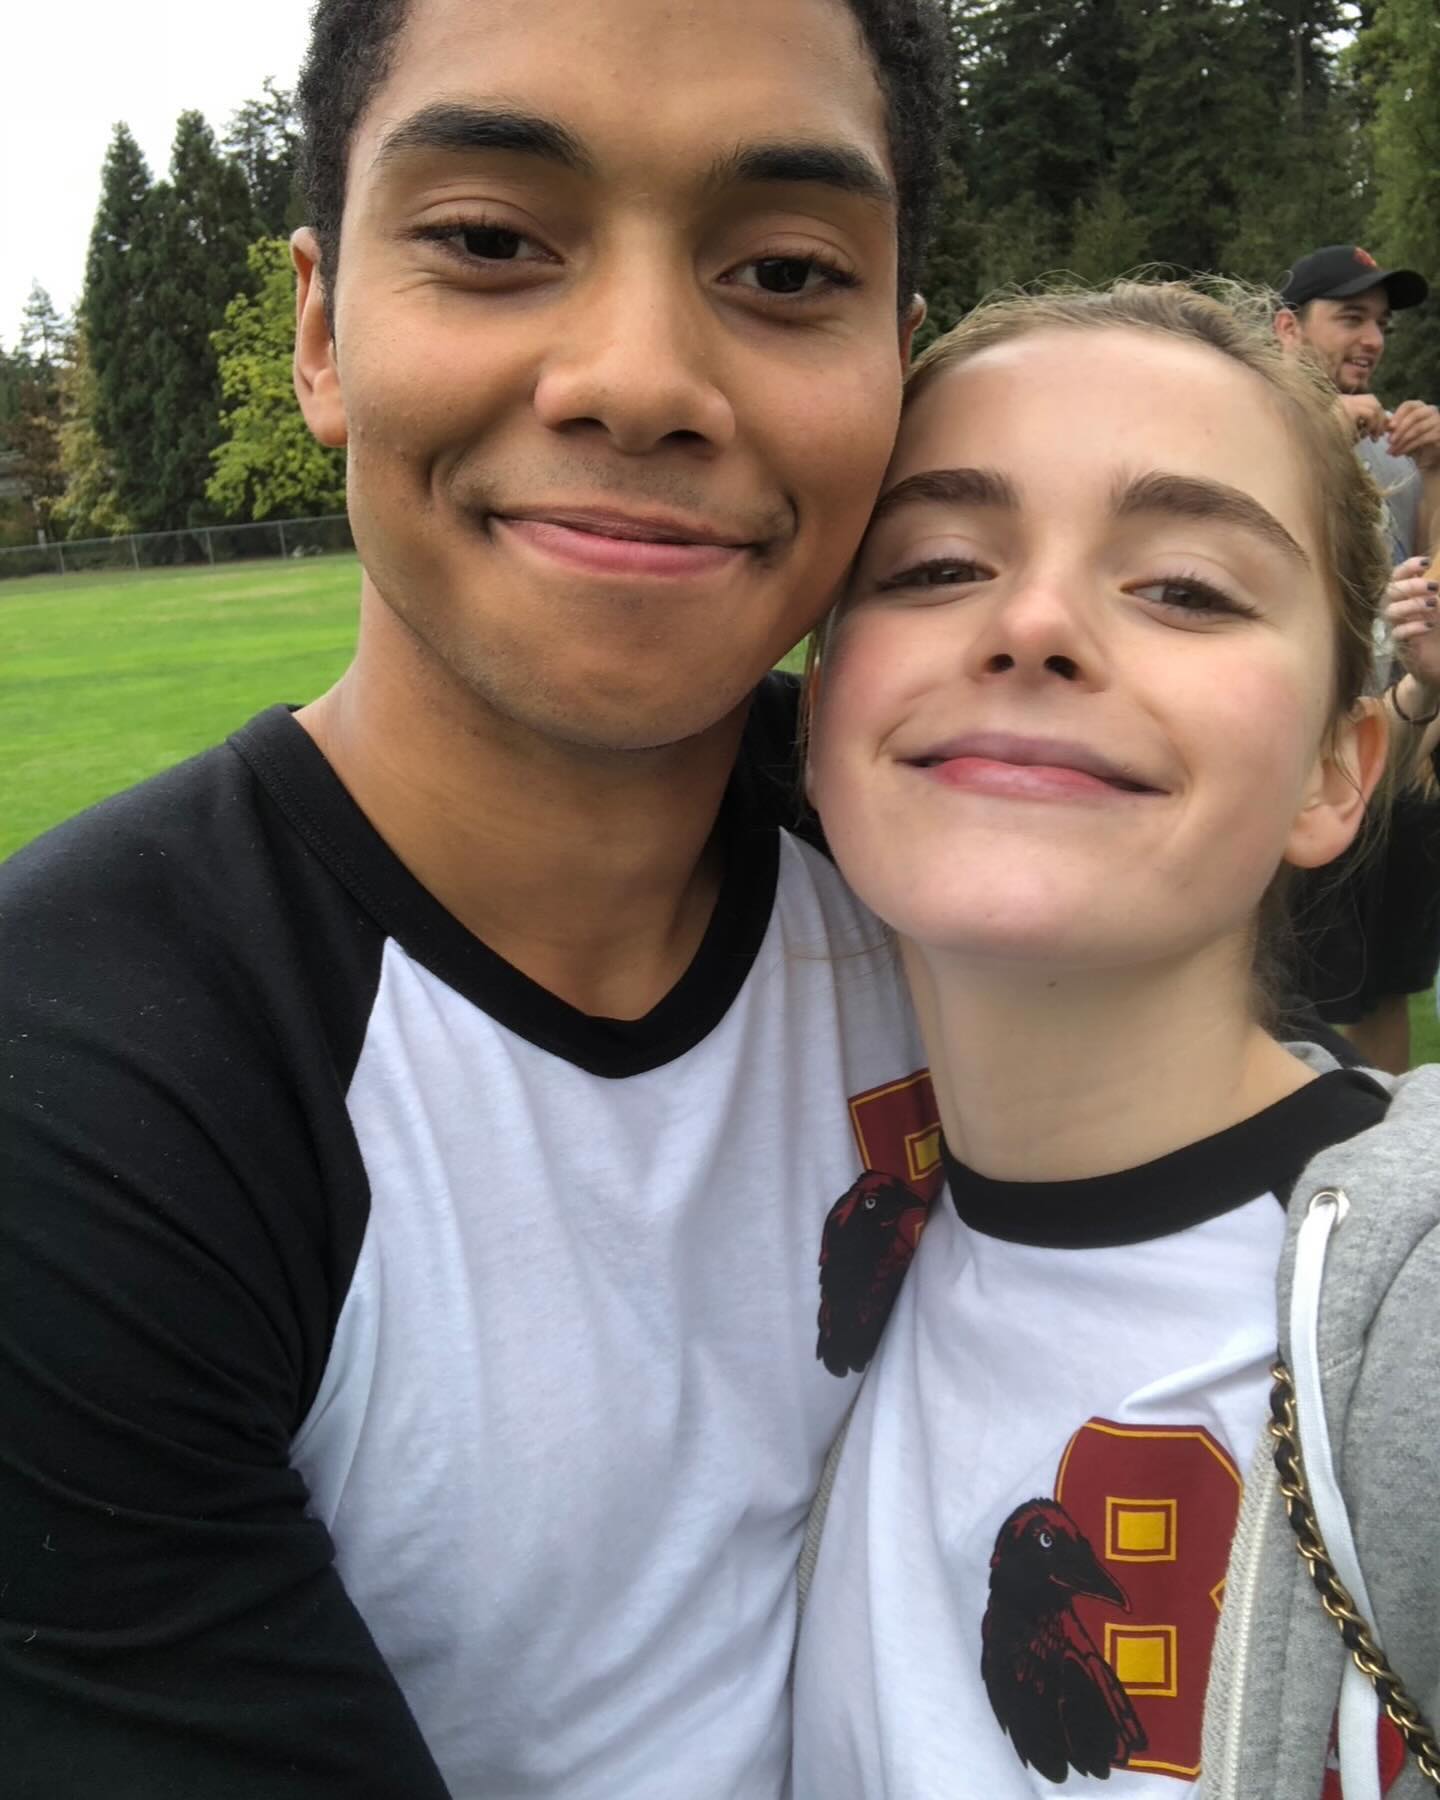 Kiernan and Chance starred together in the Netflix show The Chilling Adventures of Sabrina